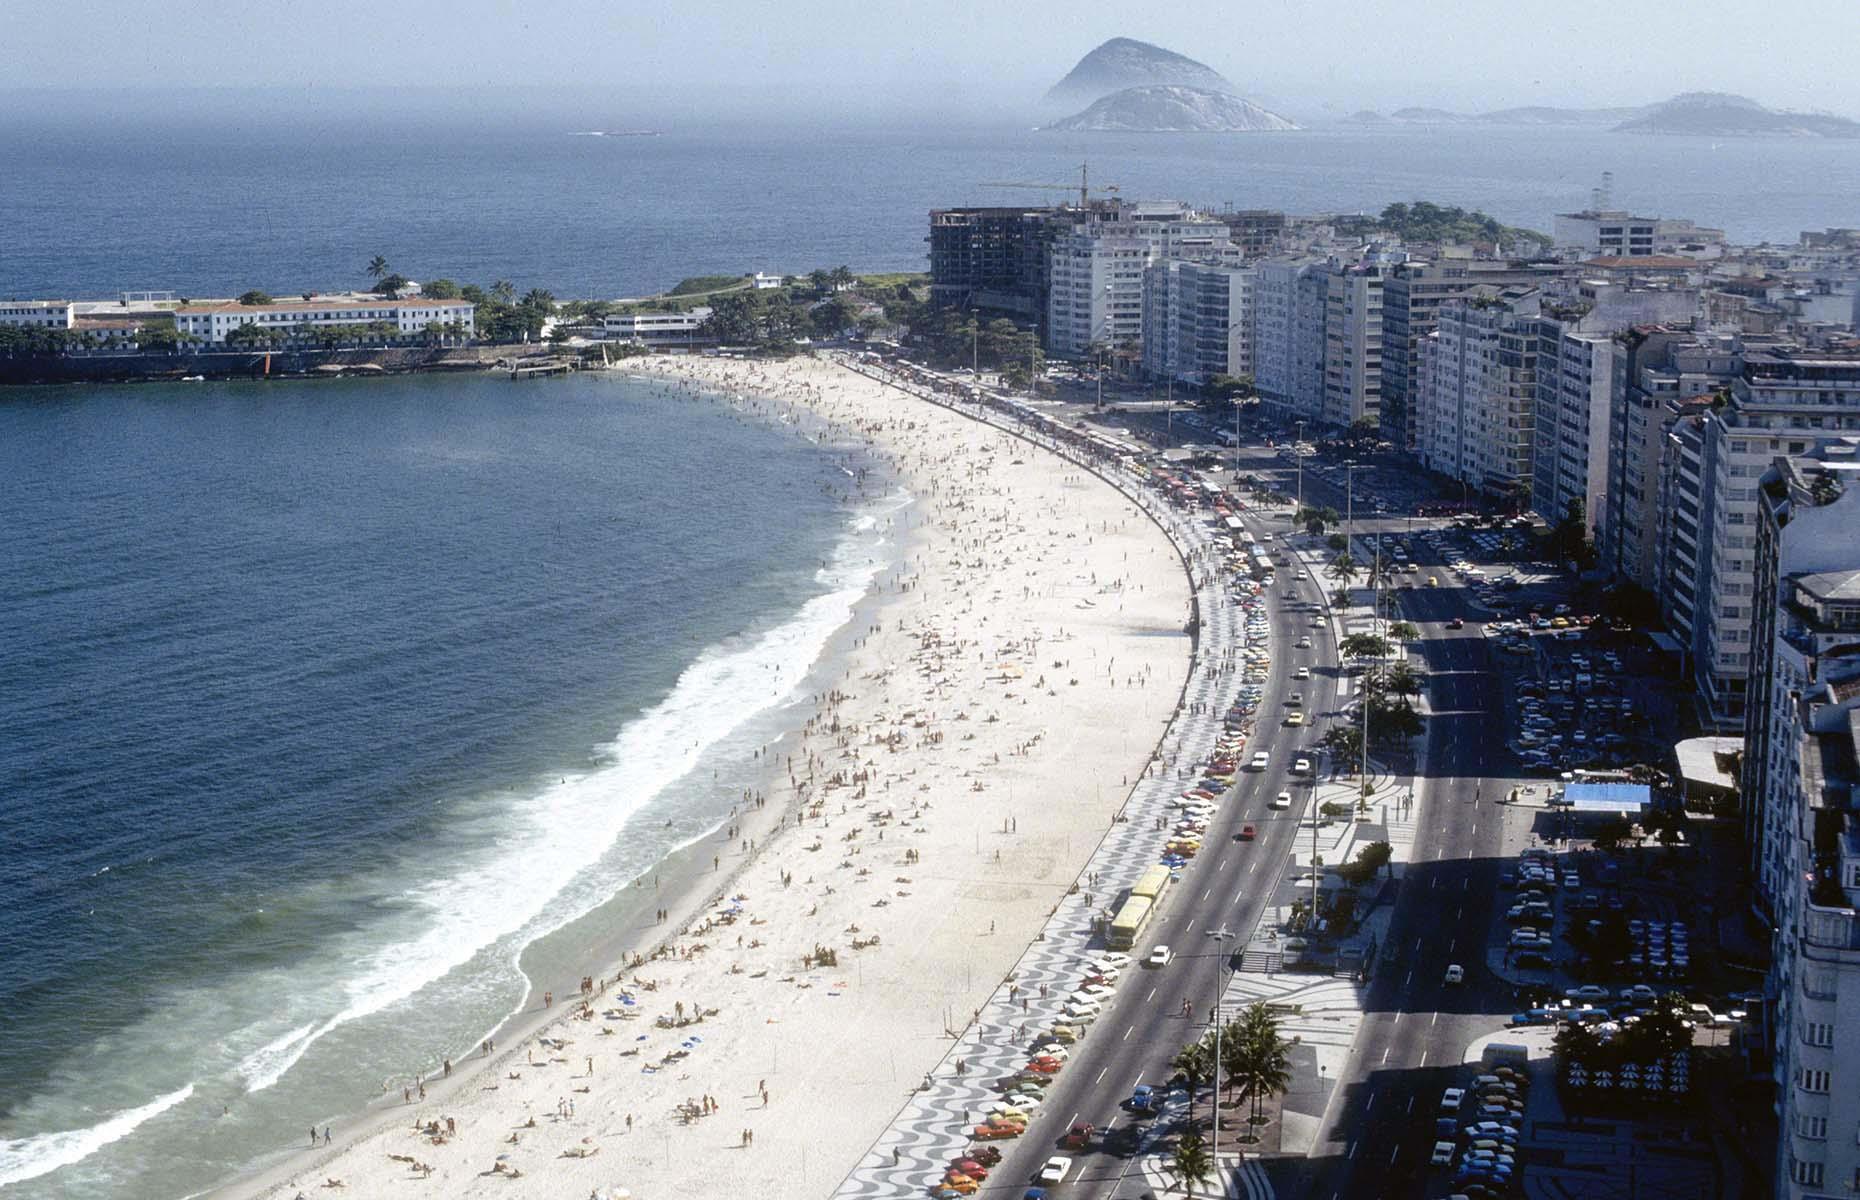 Copacabana's popularity boomed in the 1970s, a decade that saw several hotel redevelopments, the relaying of the promenade tiles and further airline links to Europe and the US. Here, thriving Copacabana is captured in the late 1970s.